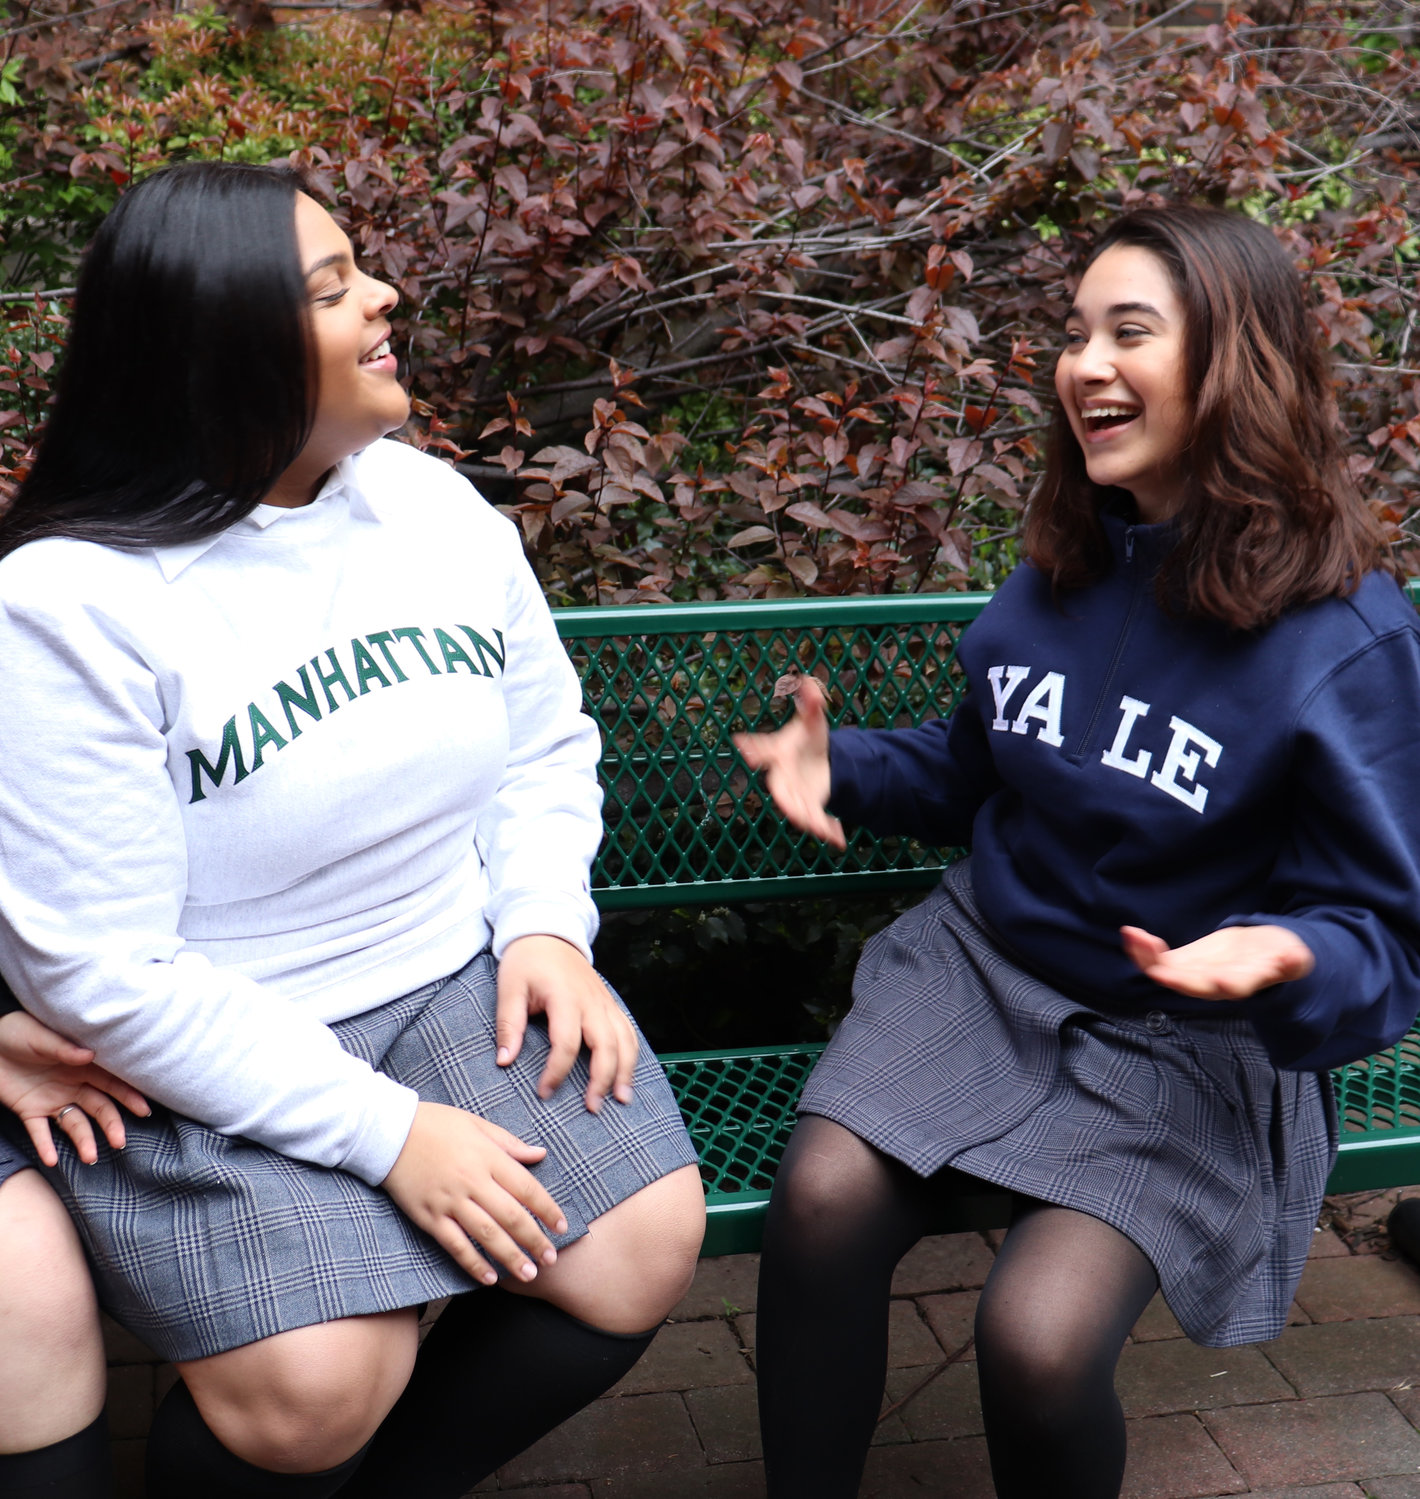 Natalie Baez and Martina Amate Perez, were members of the Class of 2019 at Aquinas. Ms. Amate Perez, the class valedictorian, now attends Yale.